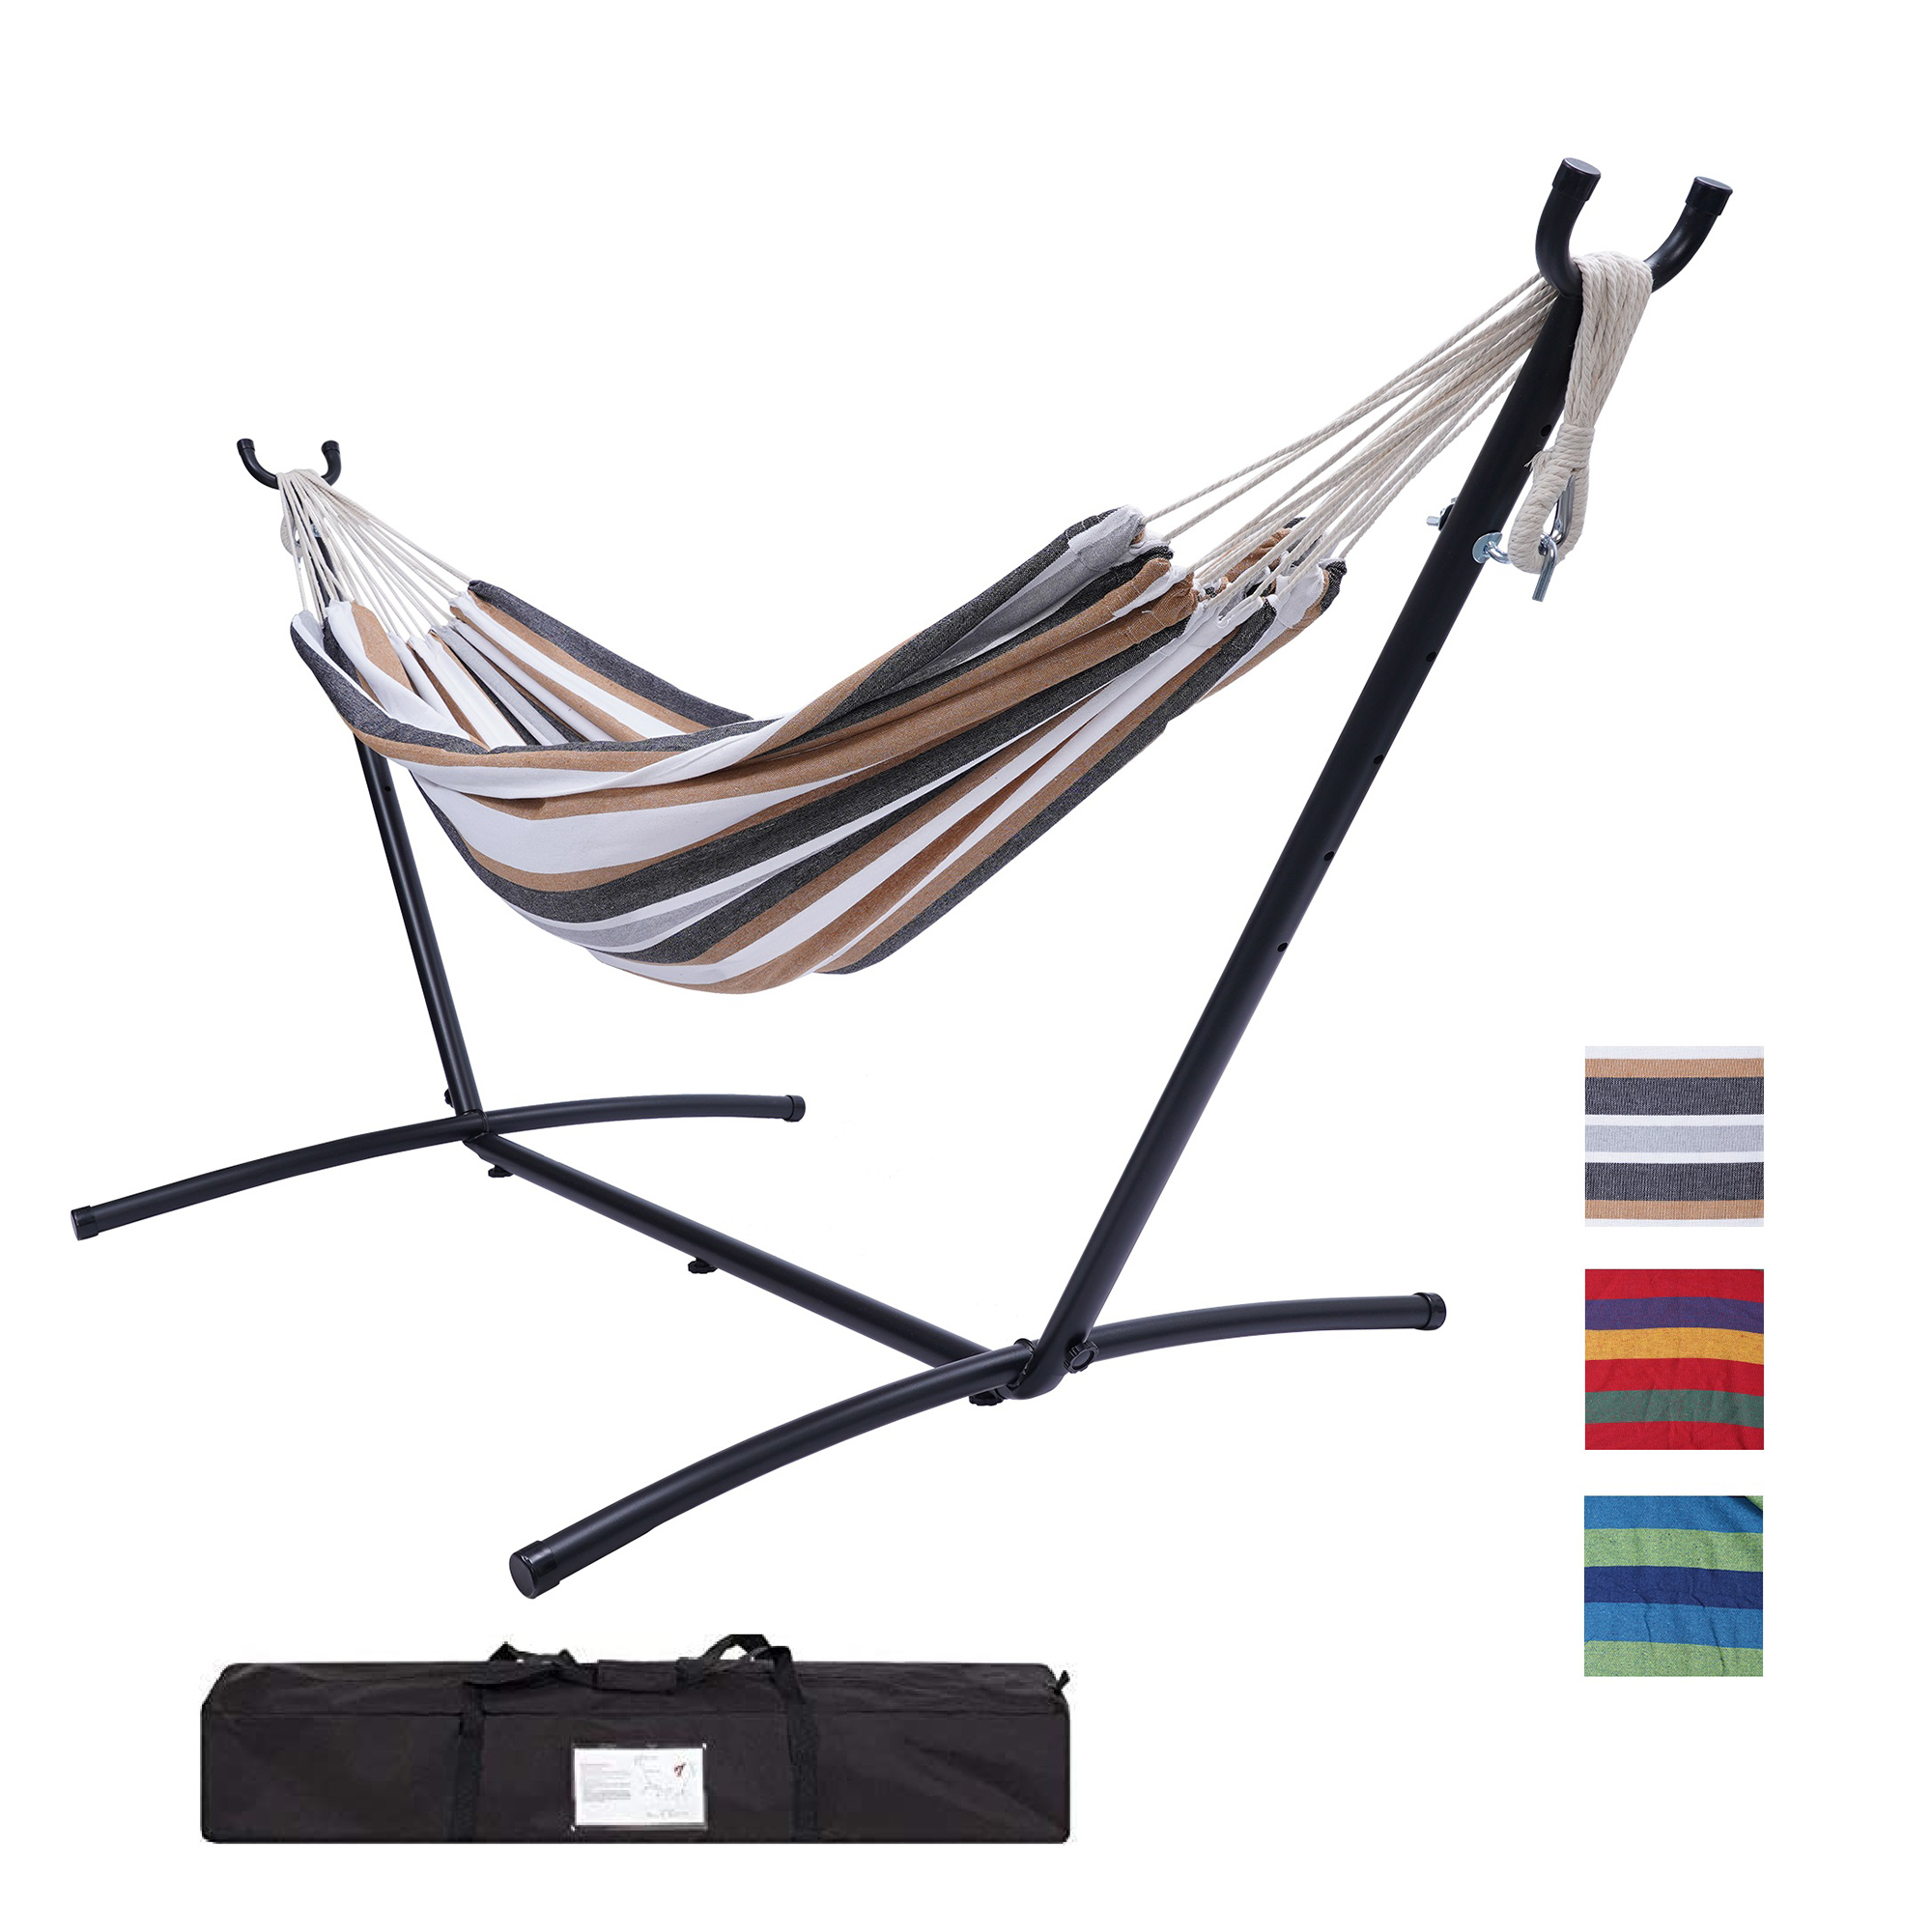 Double Classic Hammock with Stand for 2 Person- Indoor or Outdoor Use-with Carrying Pouch-Powder-coated Steel Frame - Durable 450 Pound Capacity，Brown/Gray Striped-Boyel Living